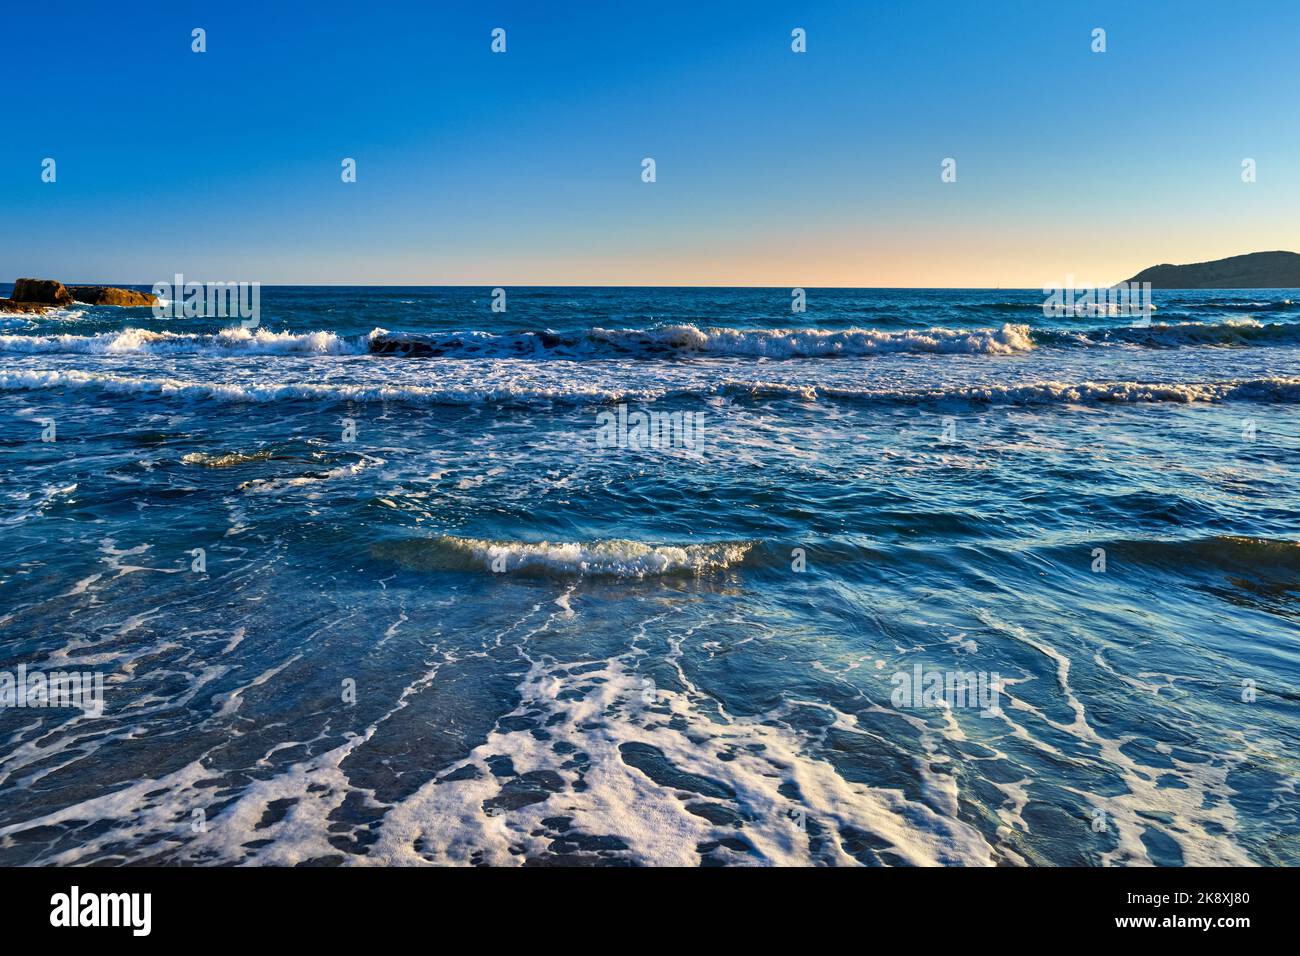 Beautiful seascape of low tidal waves, clear sunset sky, hazy hills. Clear blue and azure waters approaching with little white foam.  Stock Photo